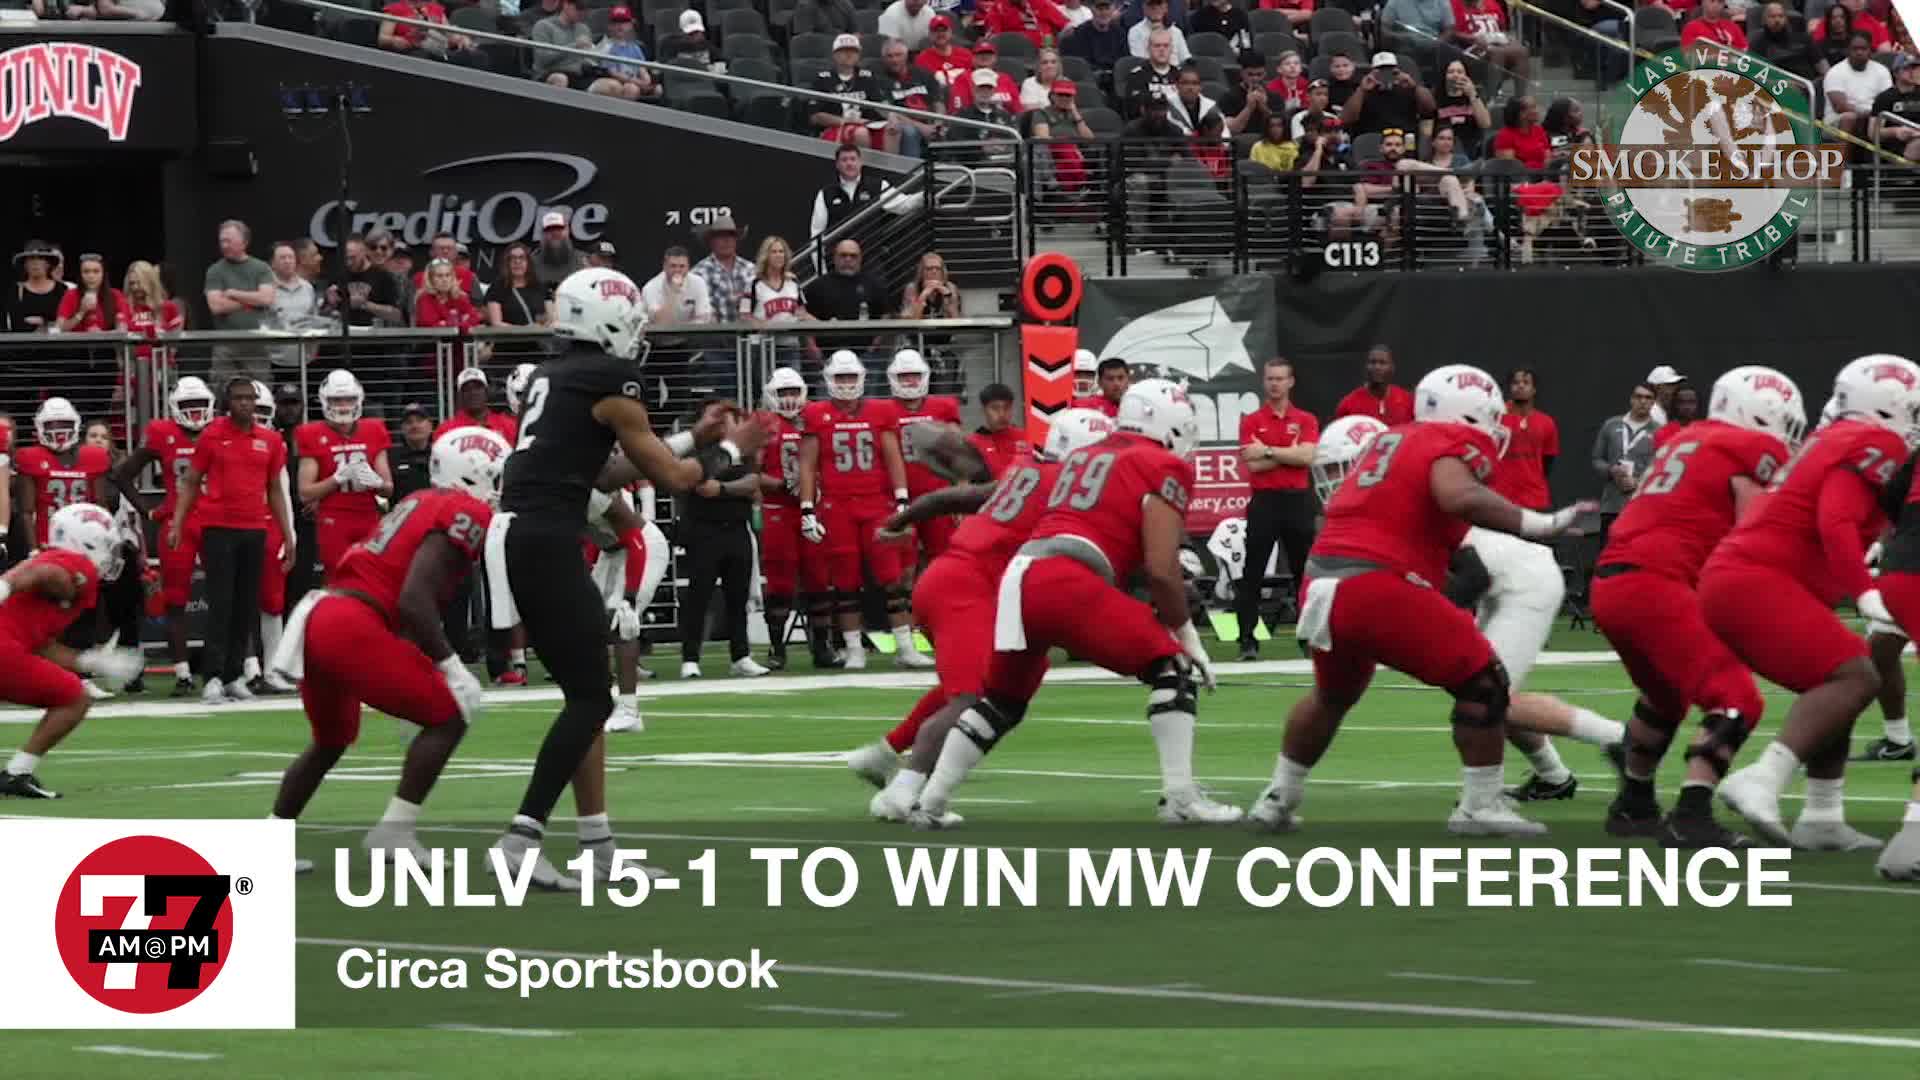 UNLV 15-1 to win conference